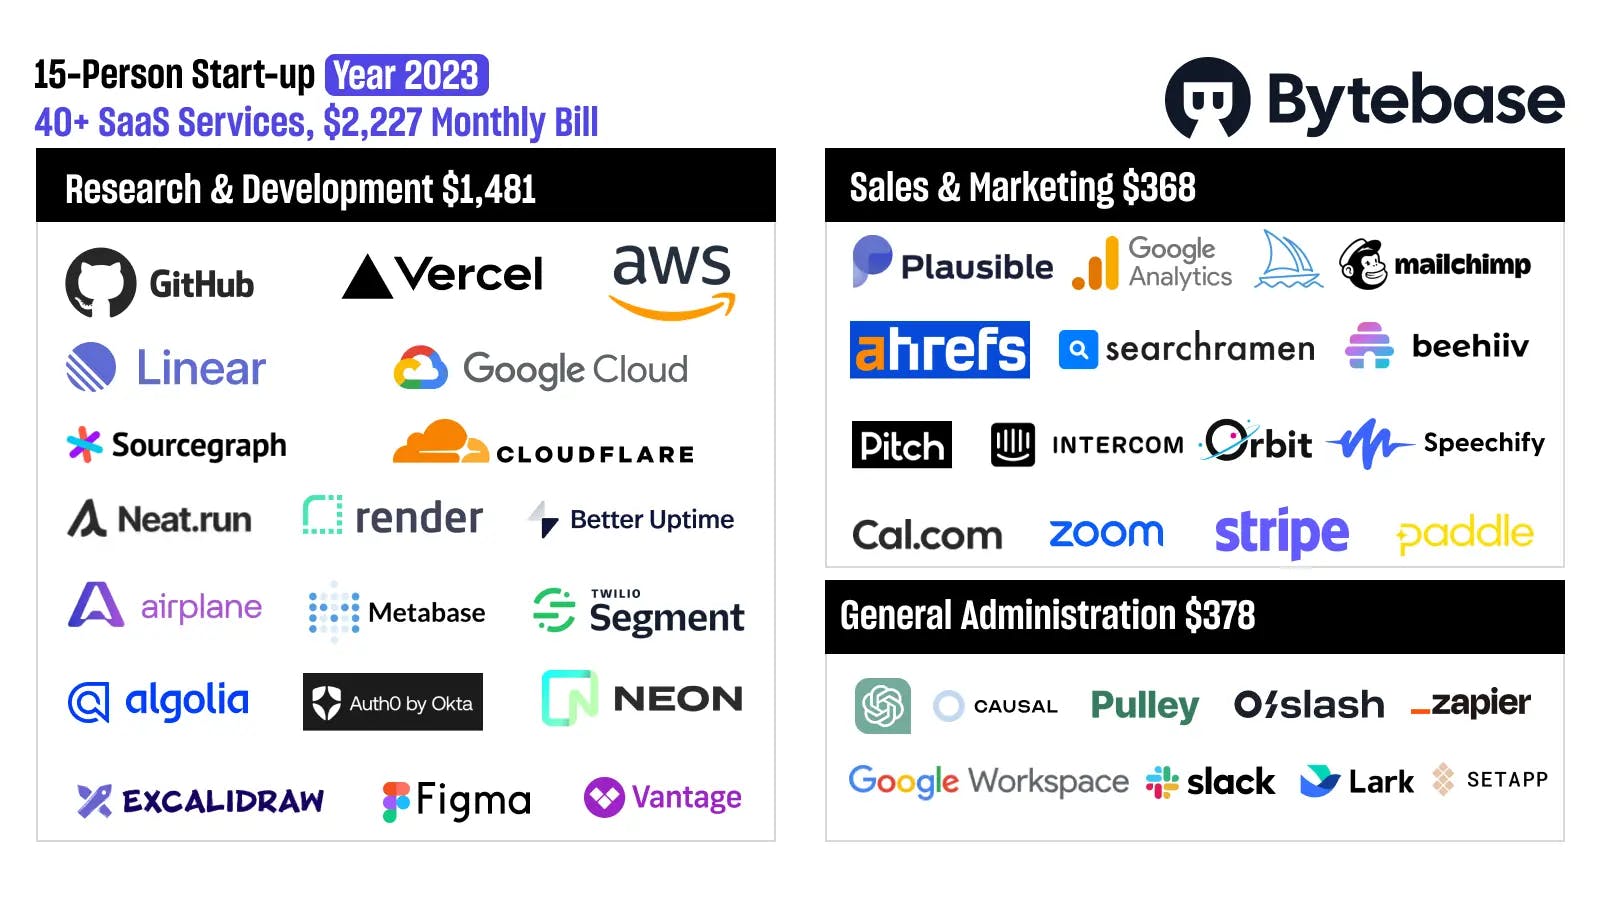 40+ SaaS Services Behind 15-Person Startup - 2nd Year in Review